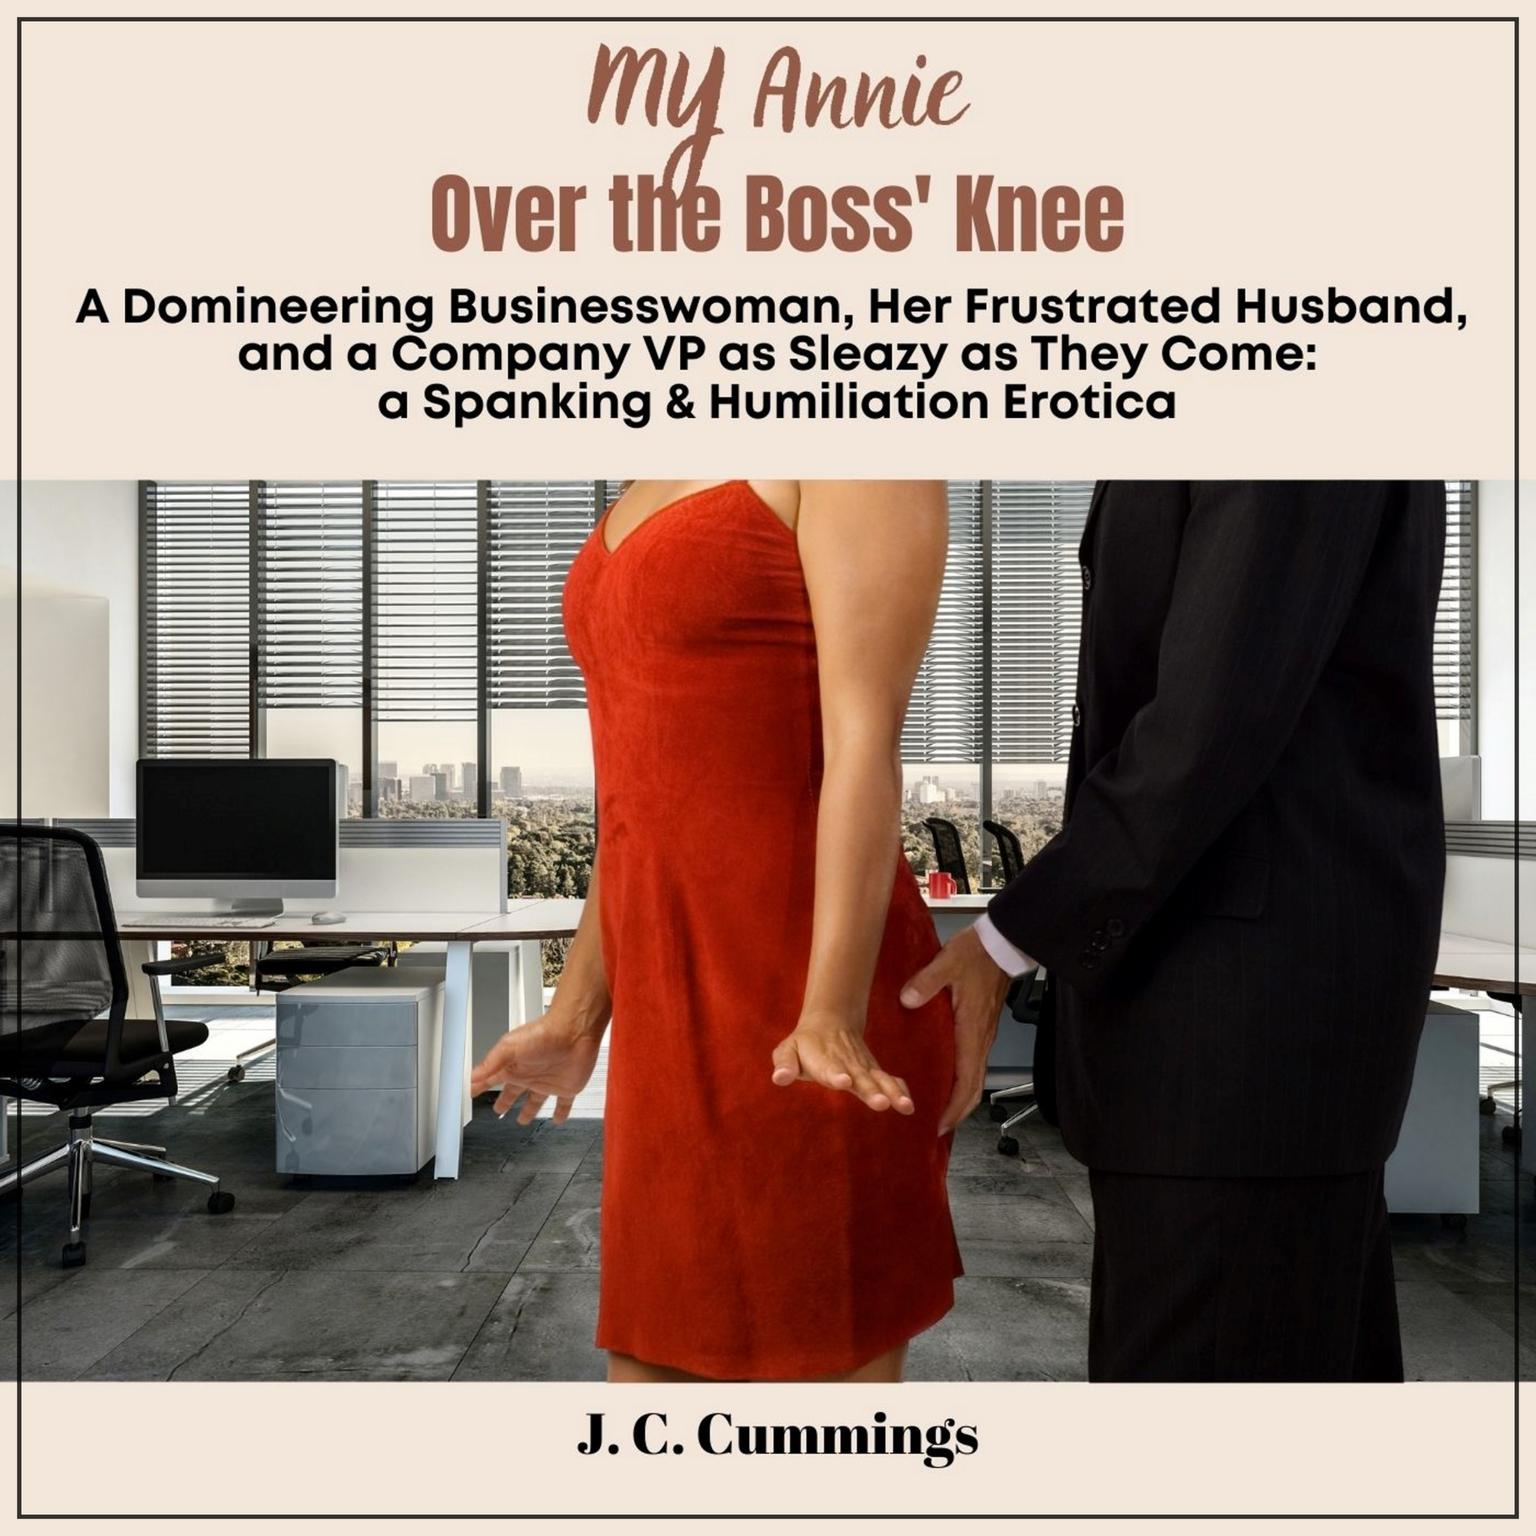 My Annie--Over the Boss Knee: A Domineering Businesswoman, Her Frustrated Husband, and a Company VP as Sleazy as They Come: Spanking & Humiliation Erotica Audiobook, by J.C. Cummings